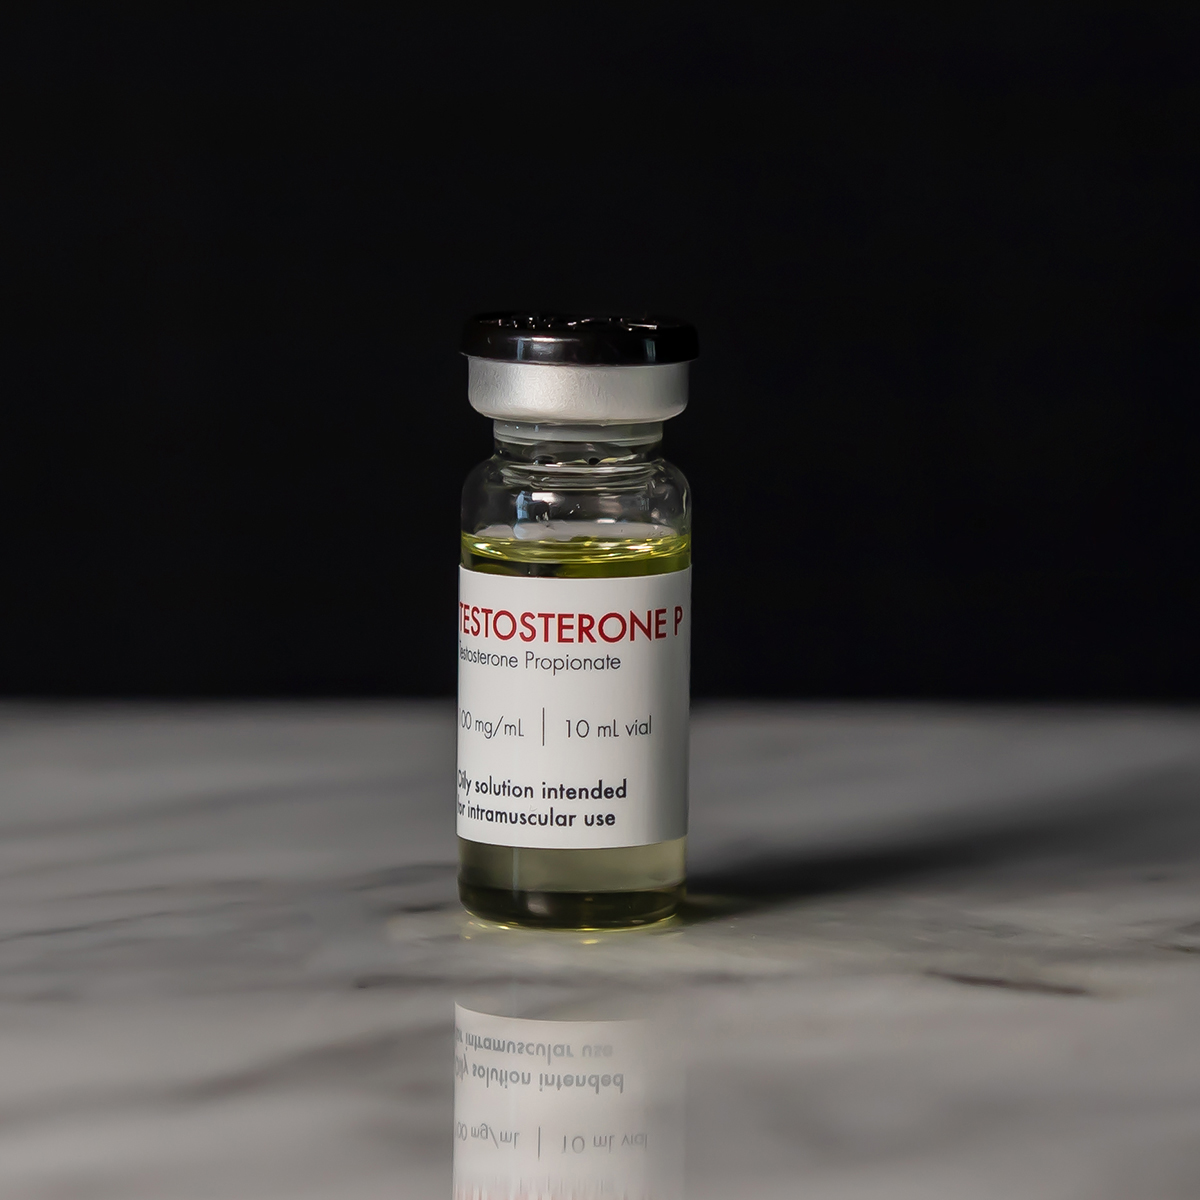 a Testosterone Propionate product pack from Legacy Laboratories Canada, showcasing the brand name, the manufacturer's name, and vital product details, indicating its role in hormone replacement therapy.